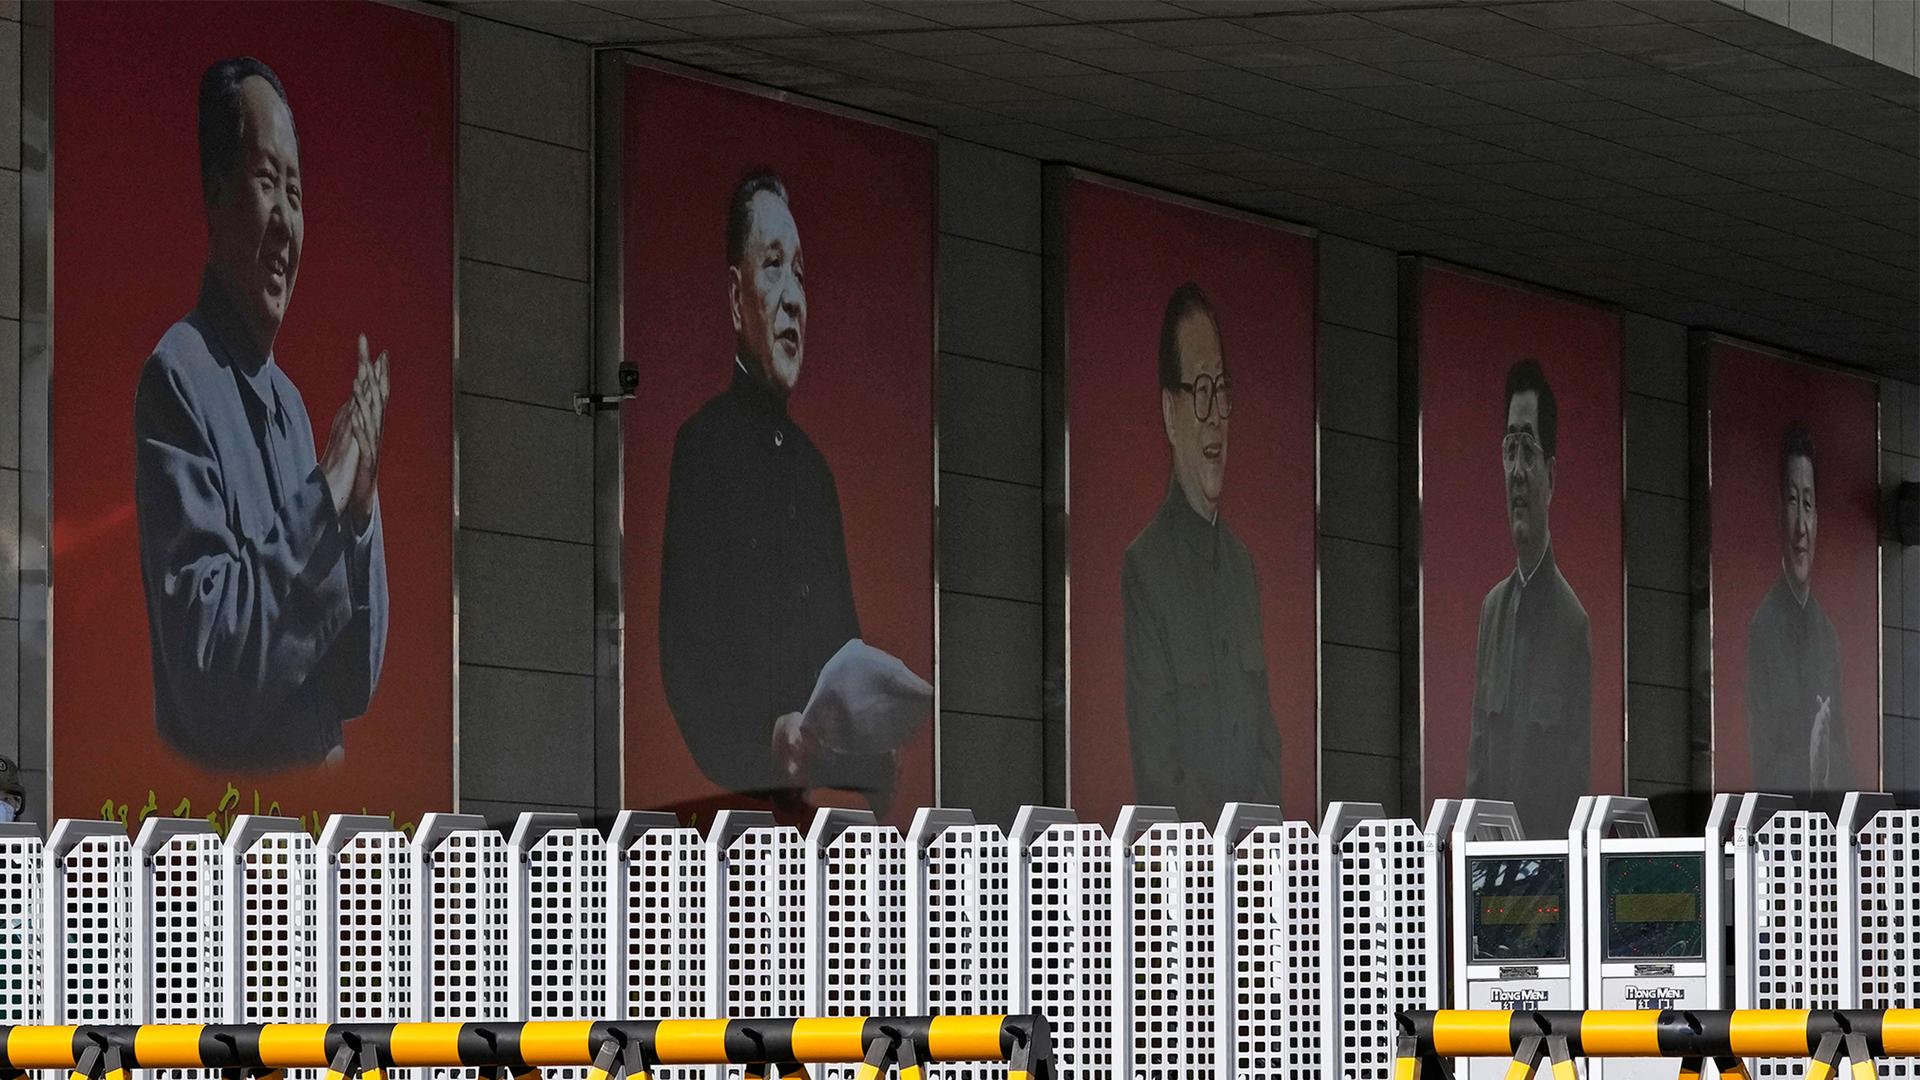 Portraits of China's former top leaders from left Mao Zedong, Deng Xiaoping, Jiang Zemin, Hu Jintao and including the current President Xi Jinping are seen at a military camp in Beijing, China